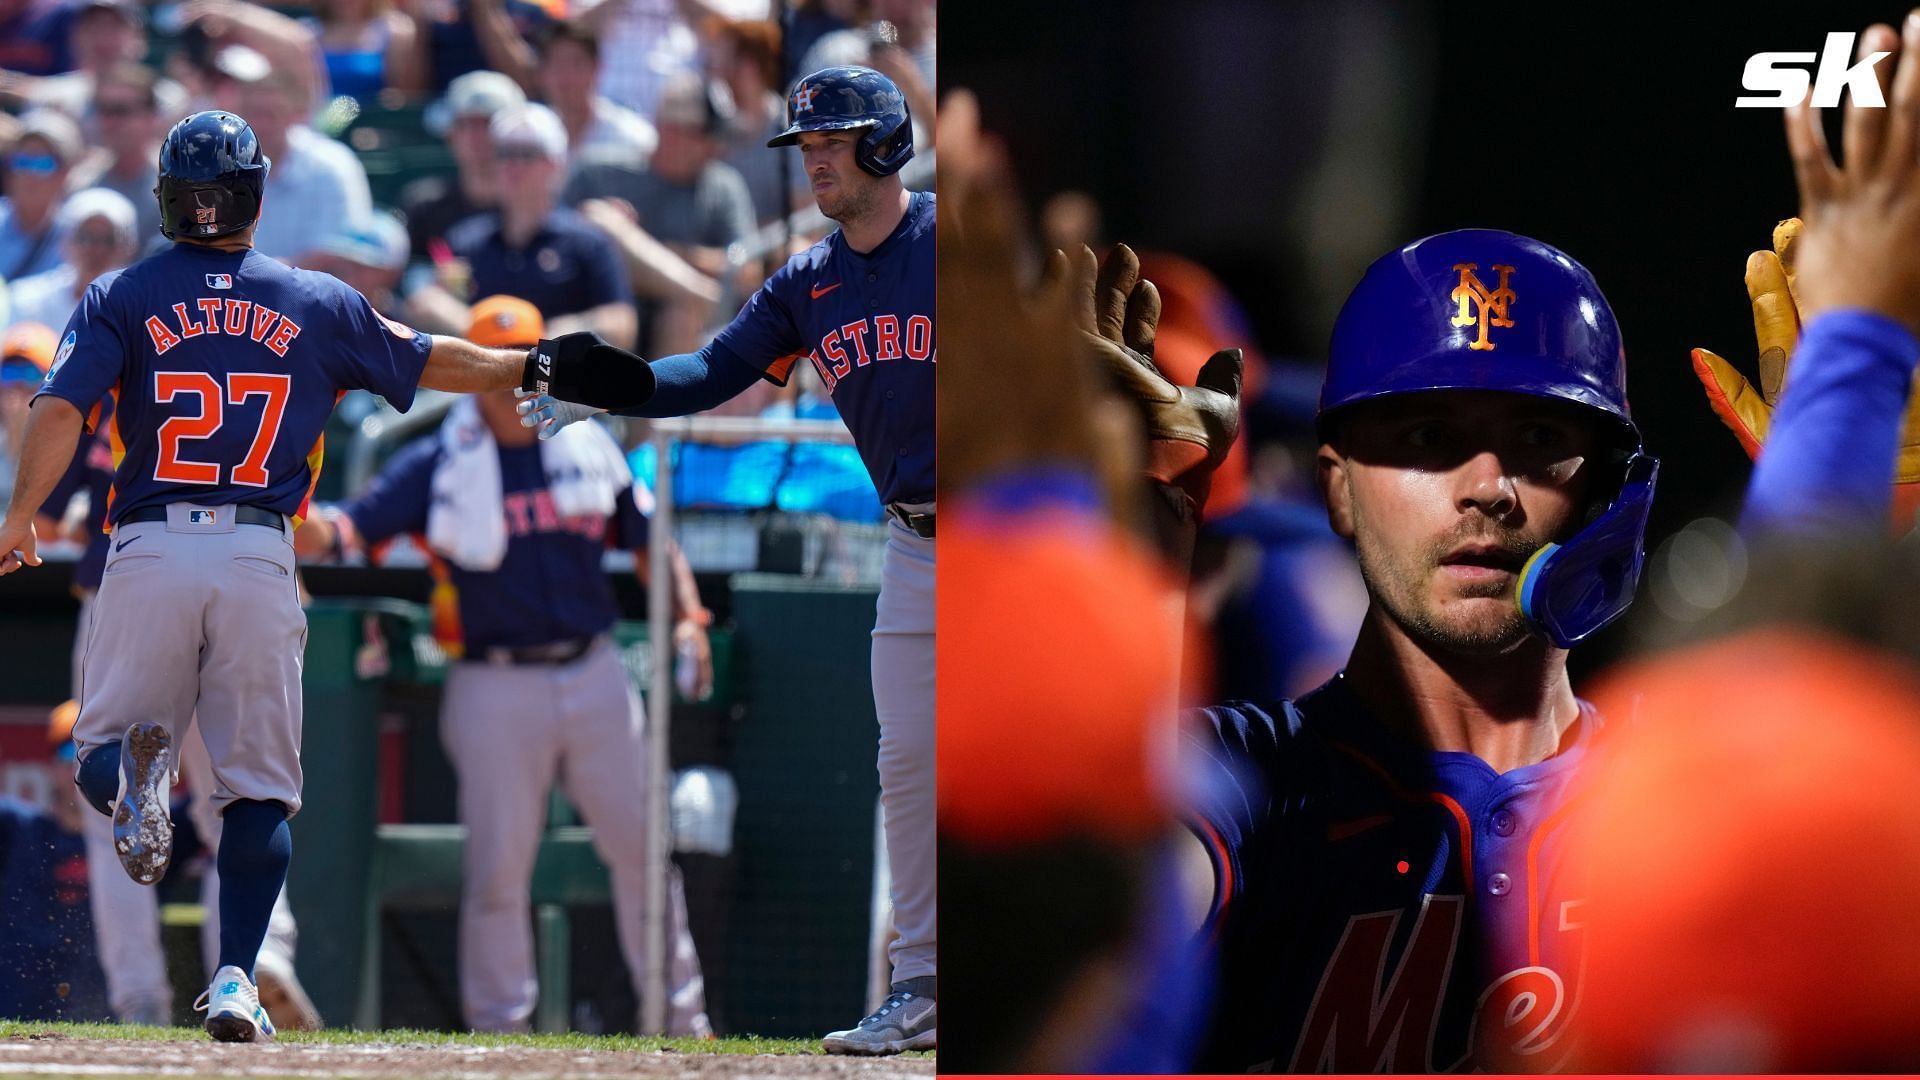 Where to watch Astros vs. Mets? Live Stream, TV Listings &amp; more - March 16